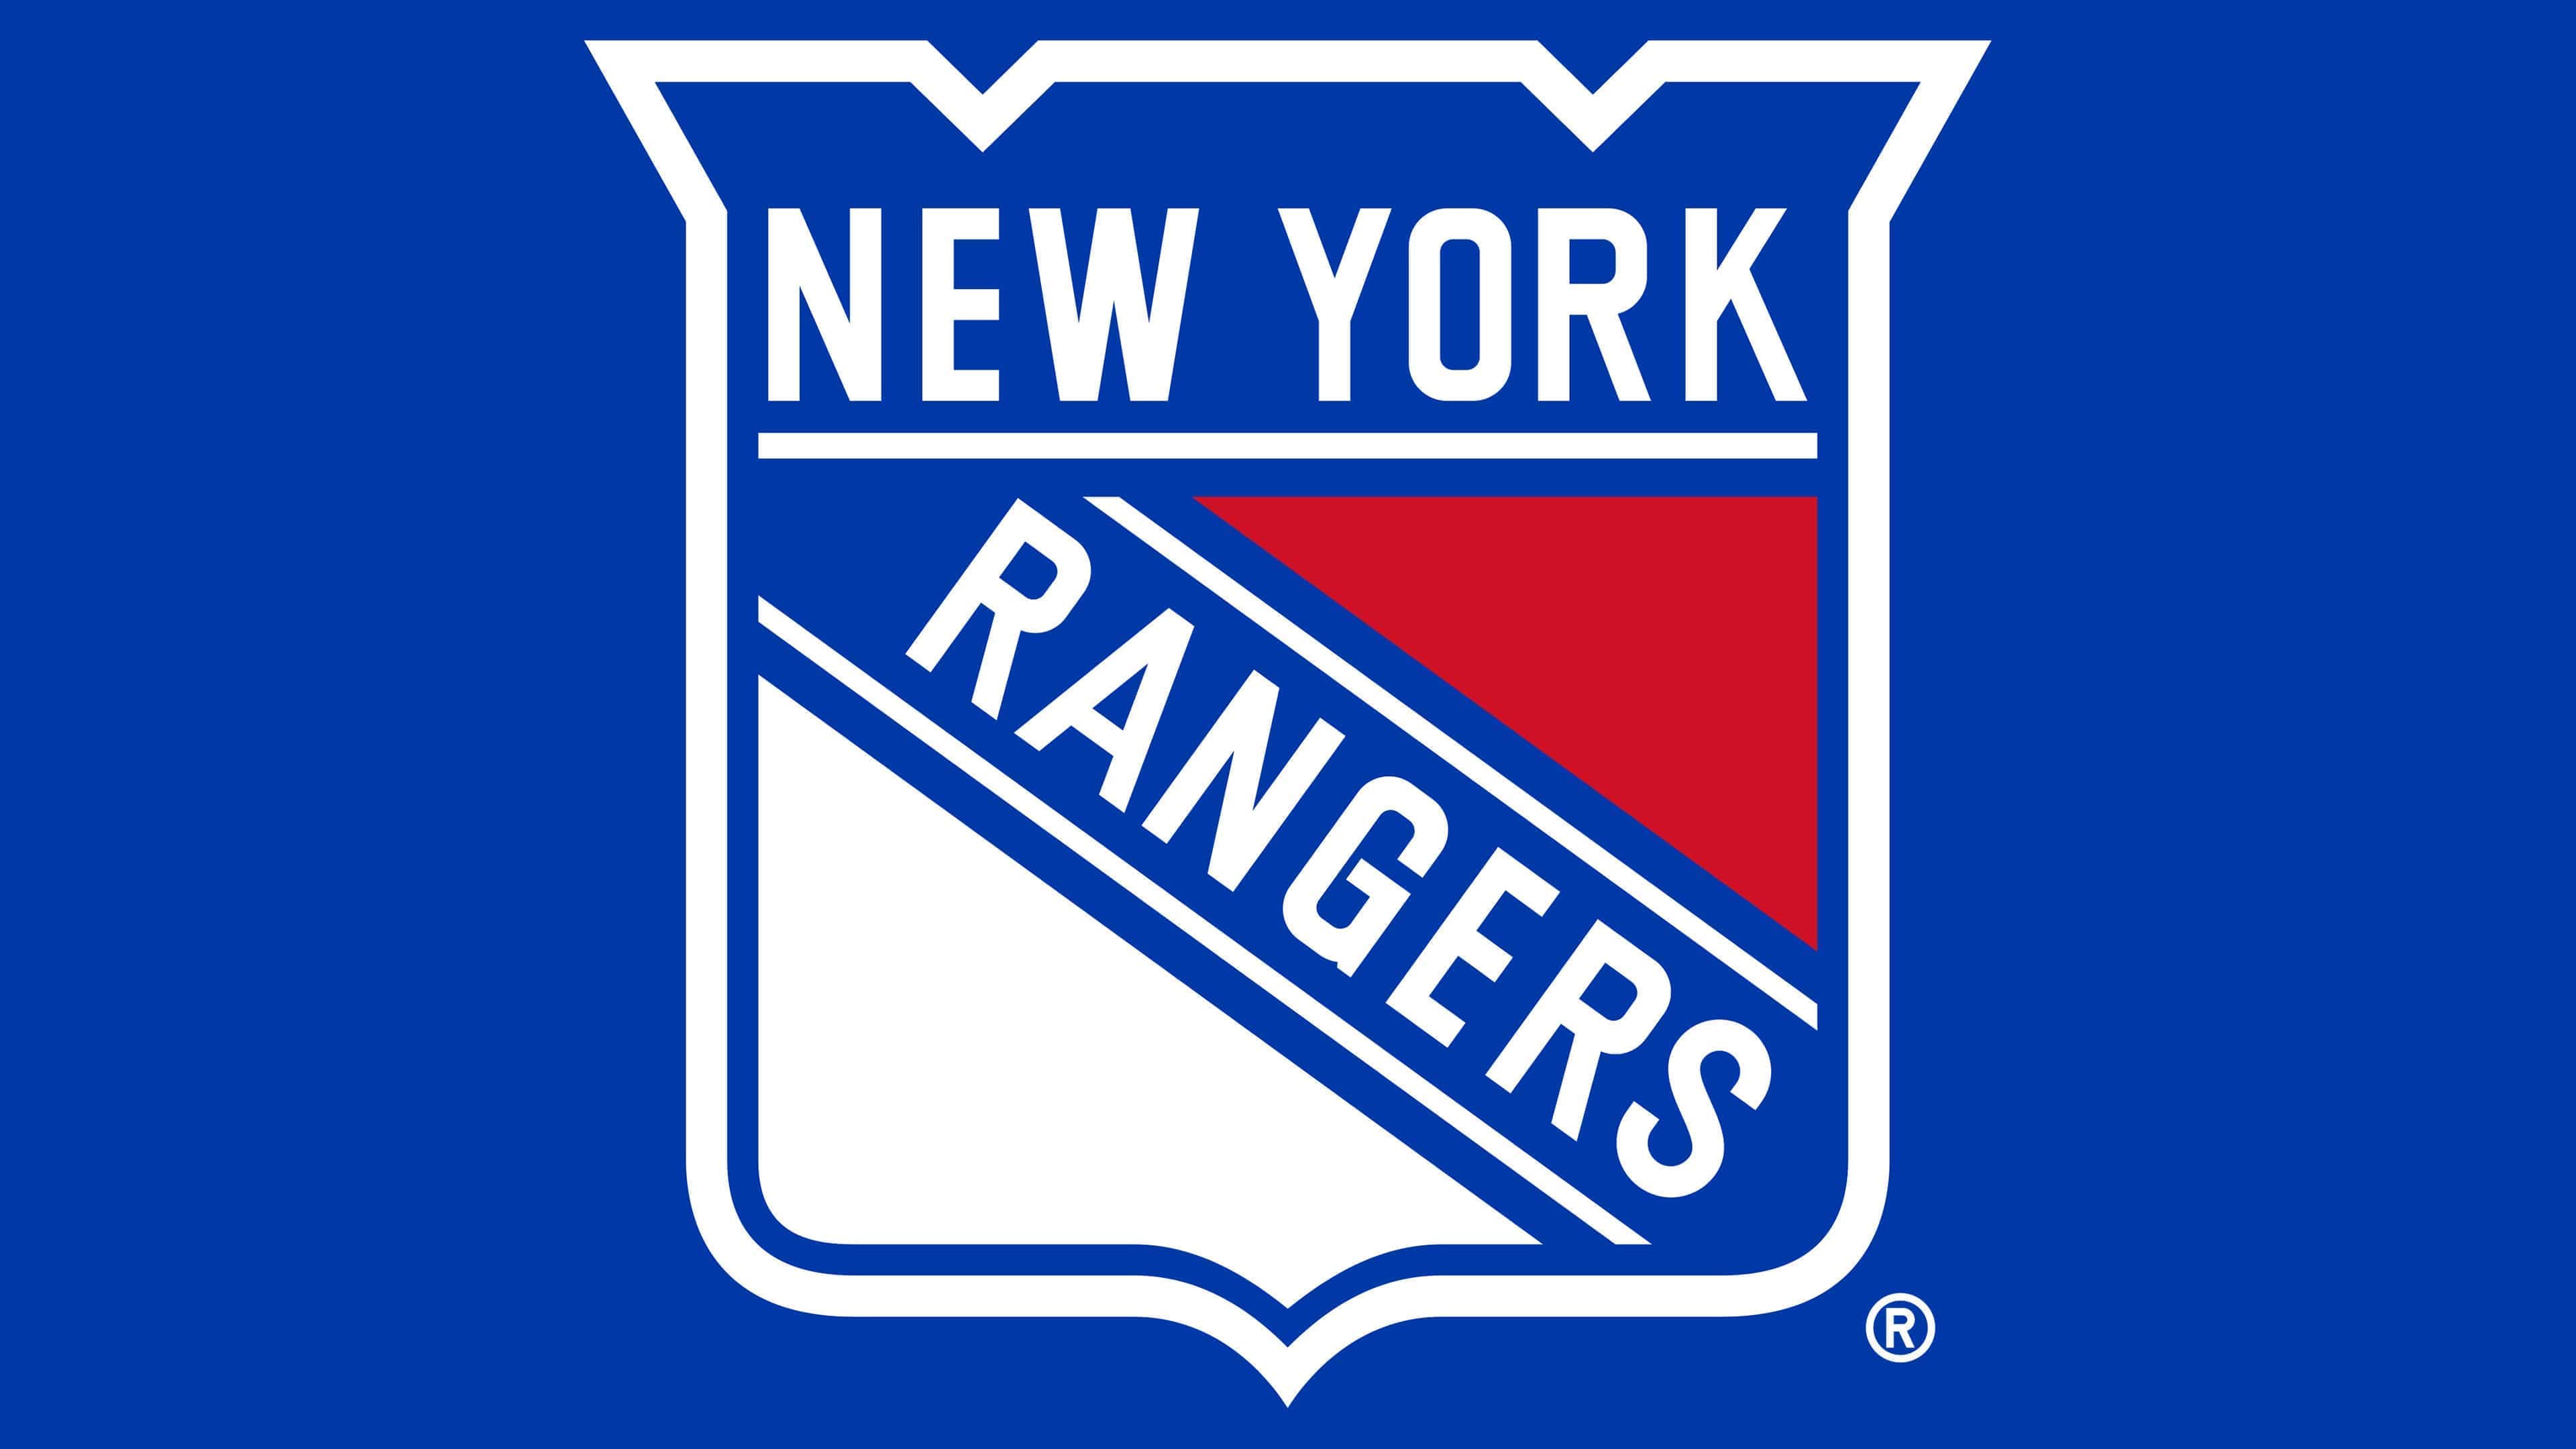 New York Rangers Logo | The most famous 